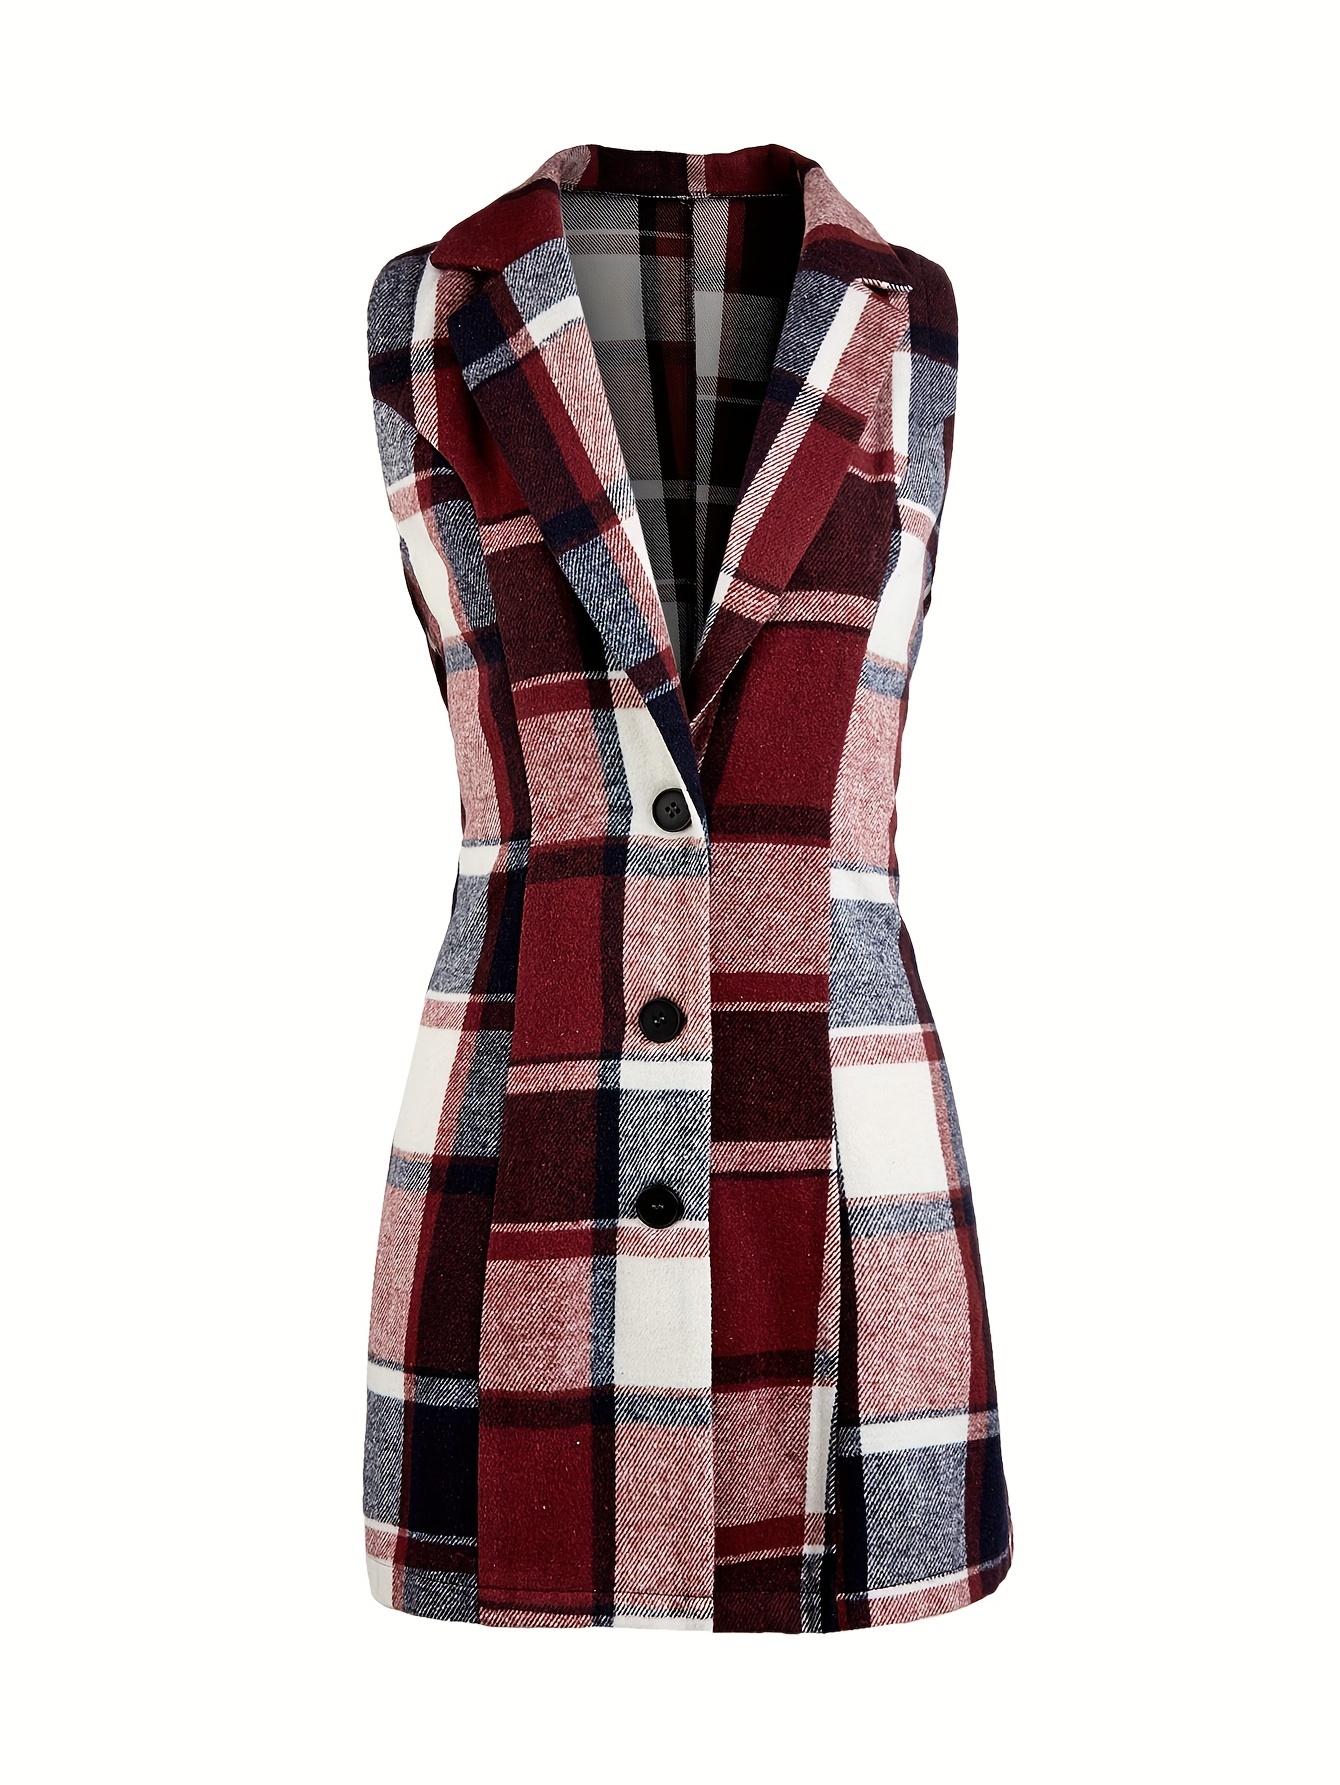 plaid sleeveless lapel blazer casual single breasted outerwear womens clothing details 0